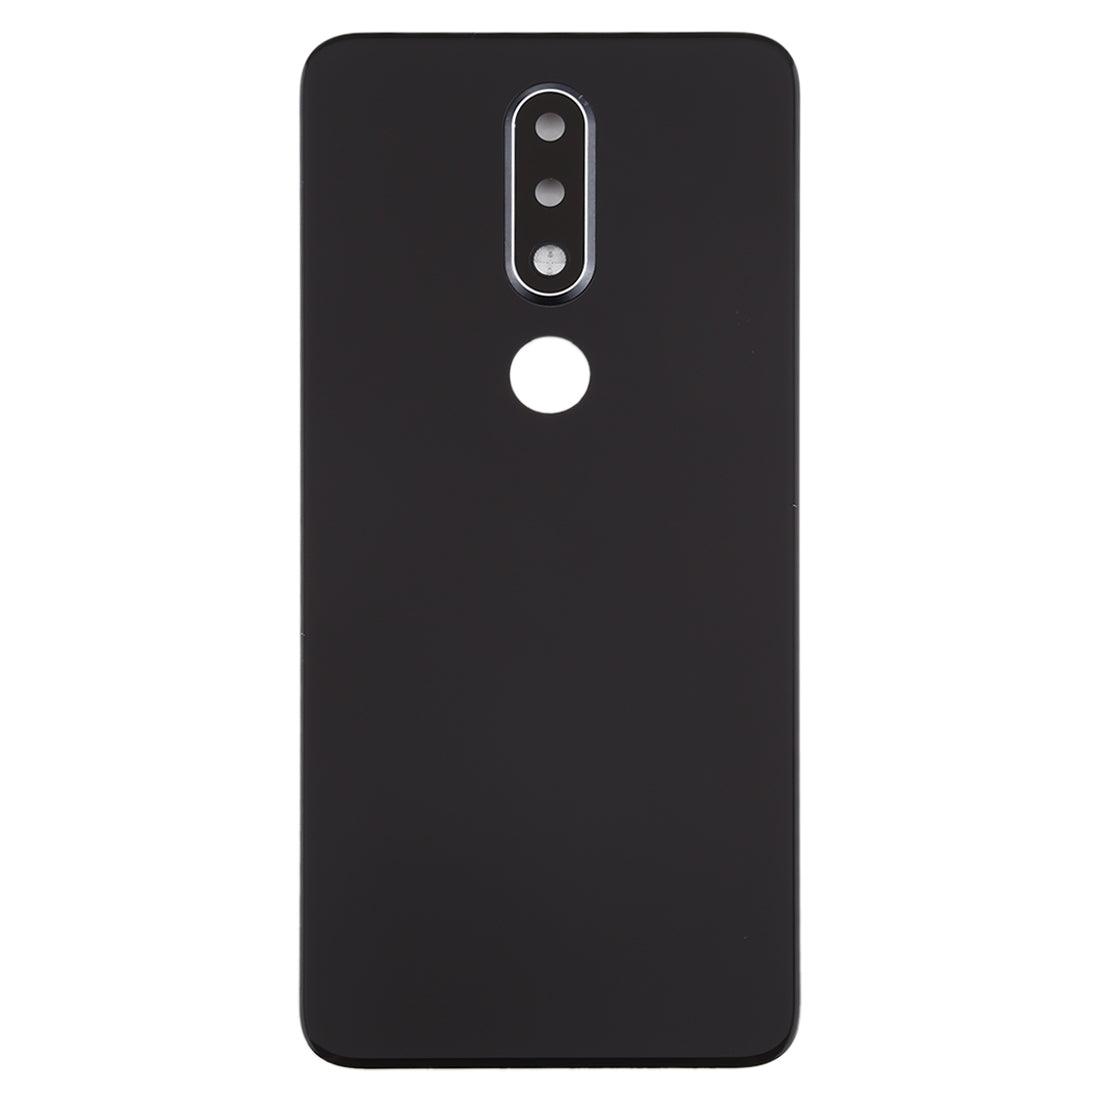 Back Glass Panel Housing Body for Nokia 6.1 Plus Black With Camera Lens